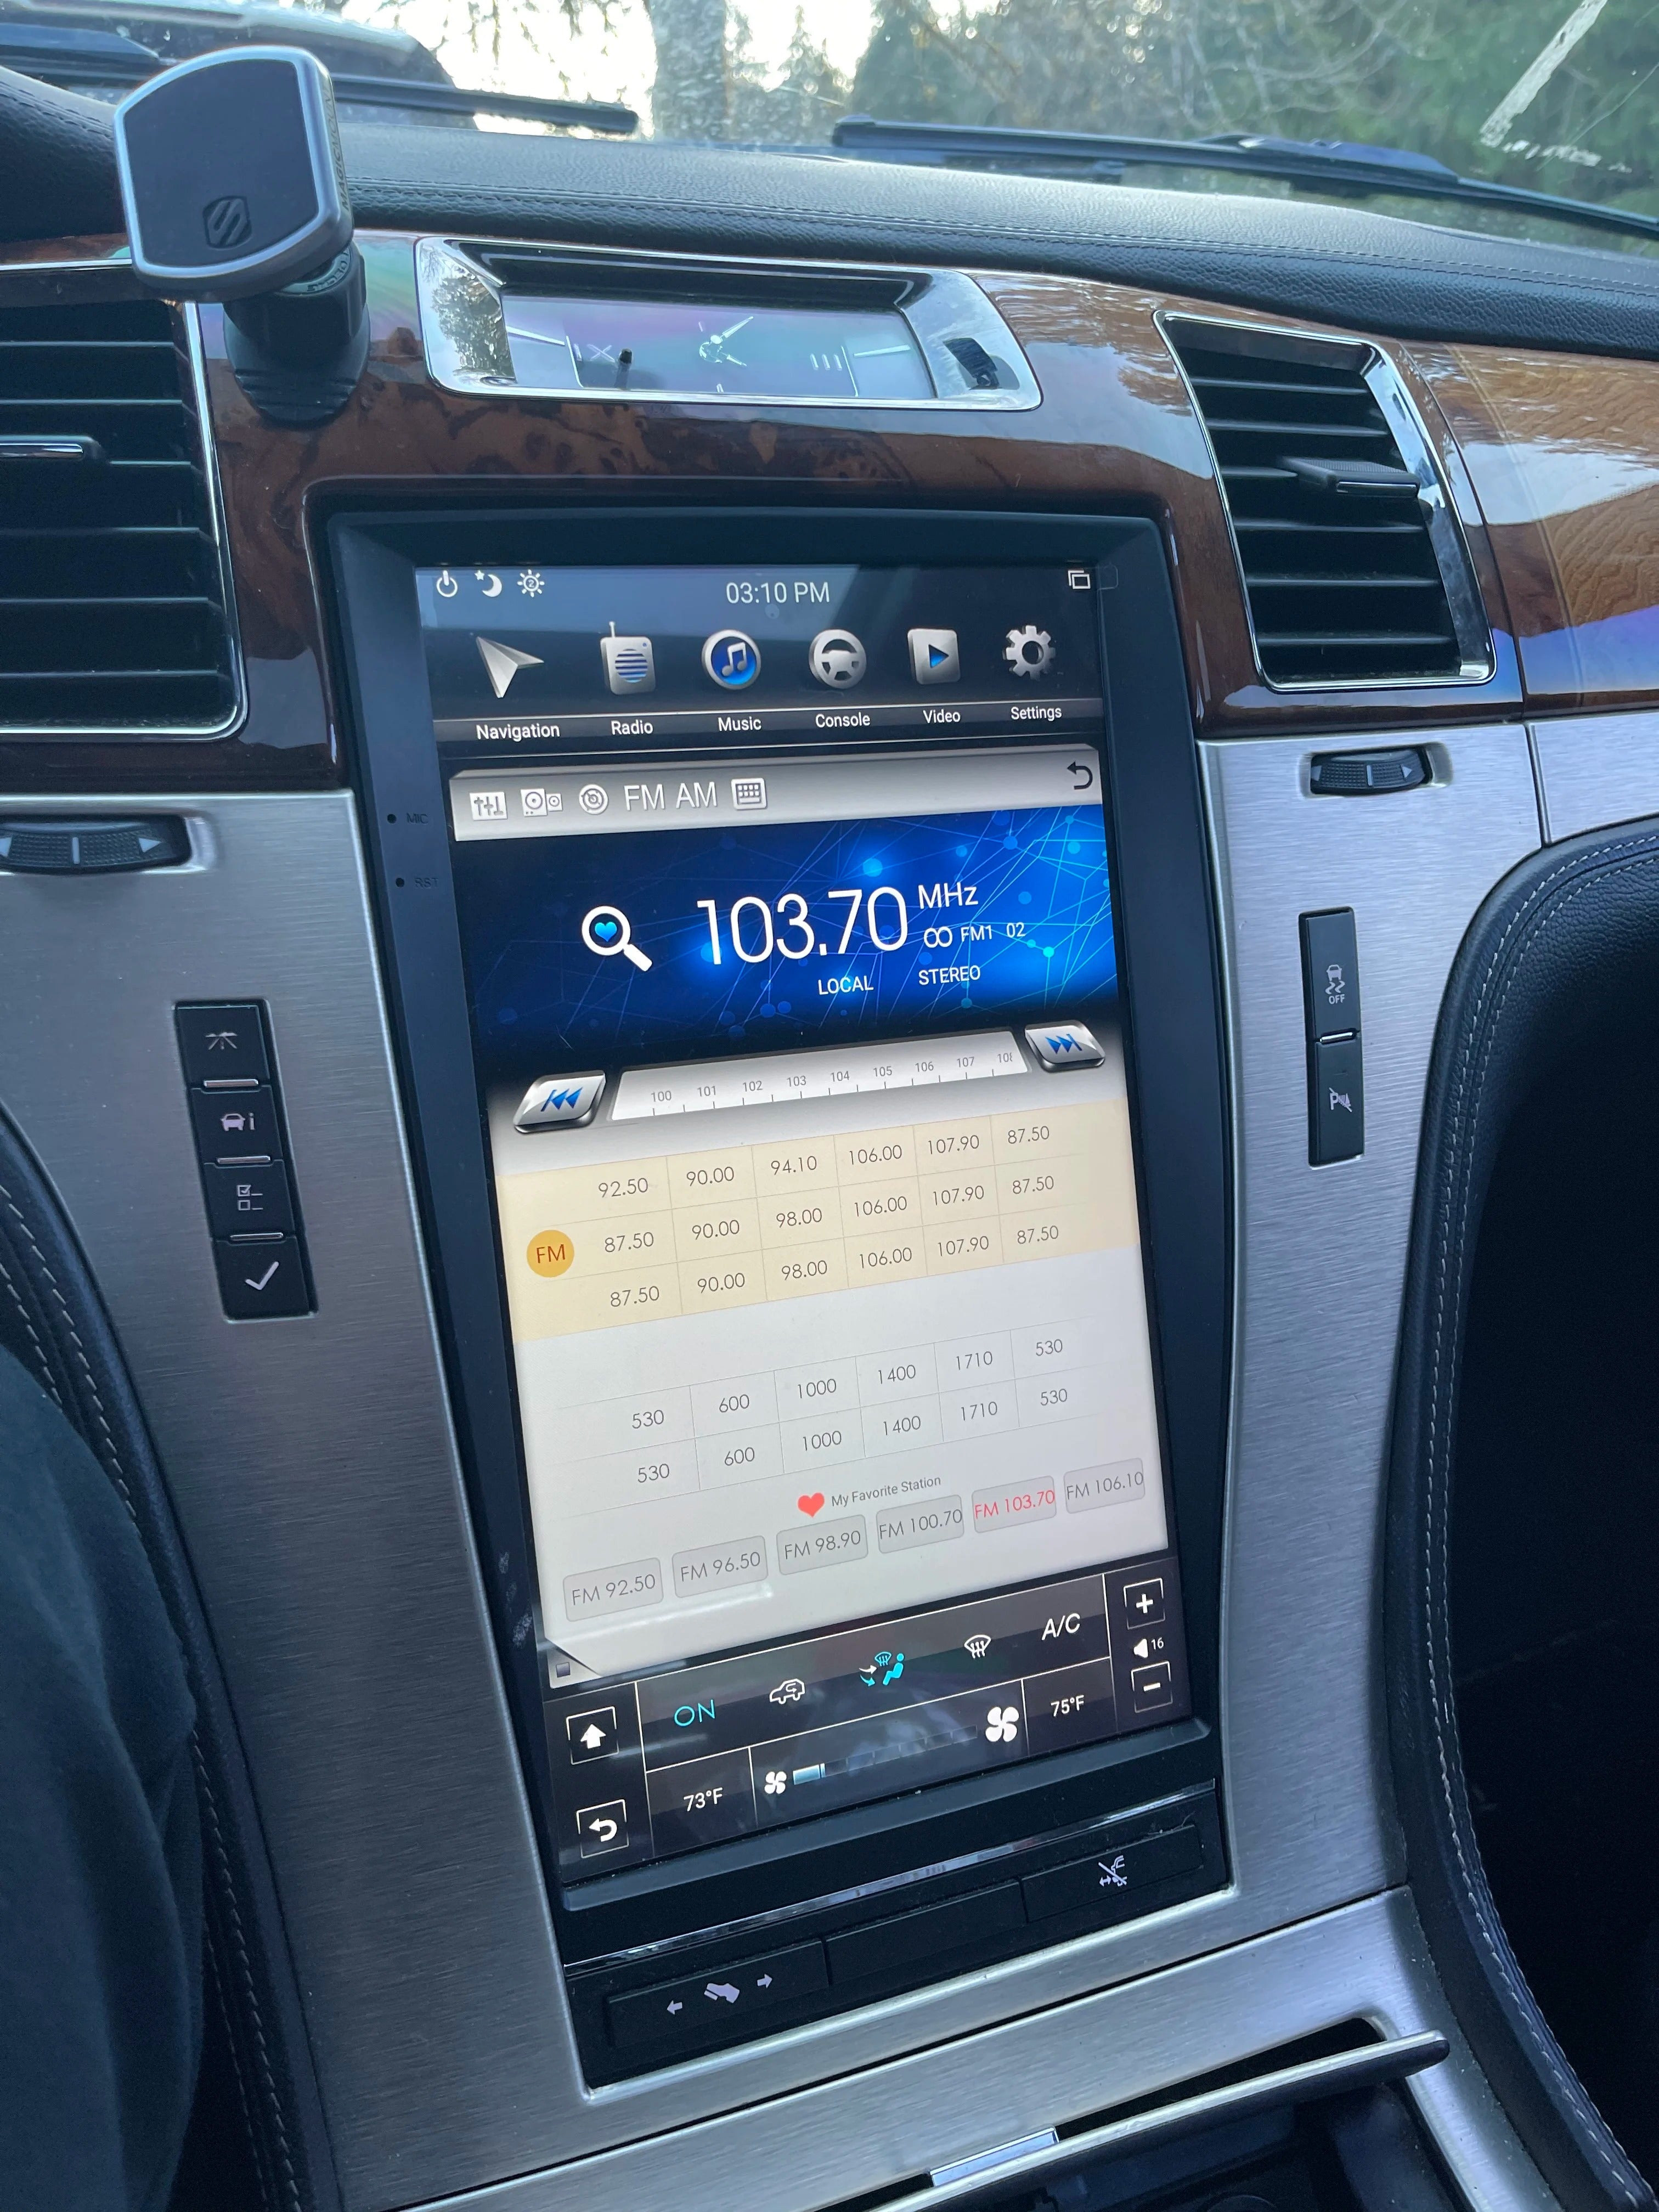 2007 - 2014 Cadillac Escalade 13.6" Android 12 Multimedia Tesla style Touchscreen Display + Built-in CarPlay & Android Auto